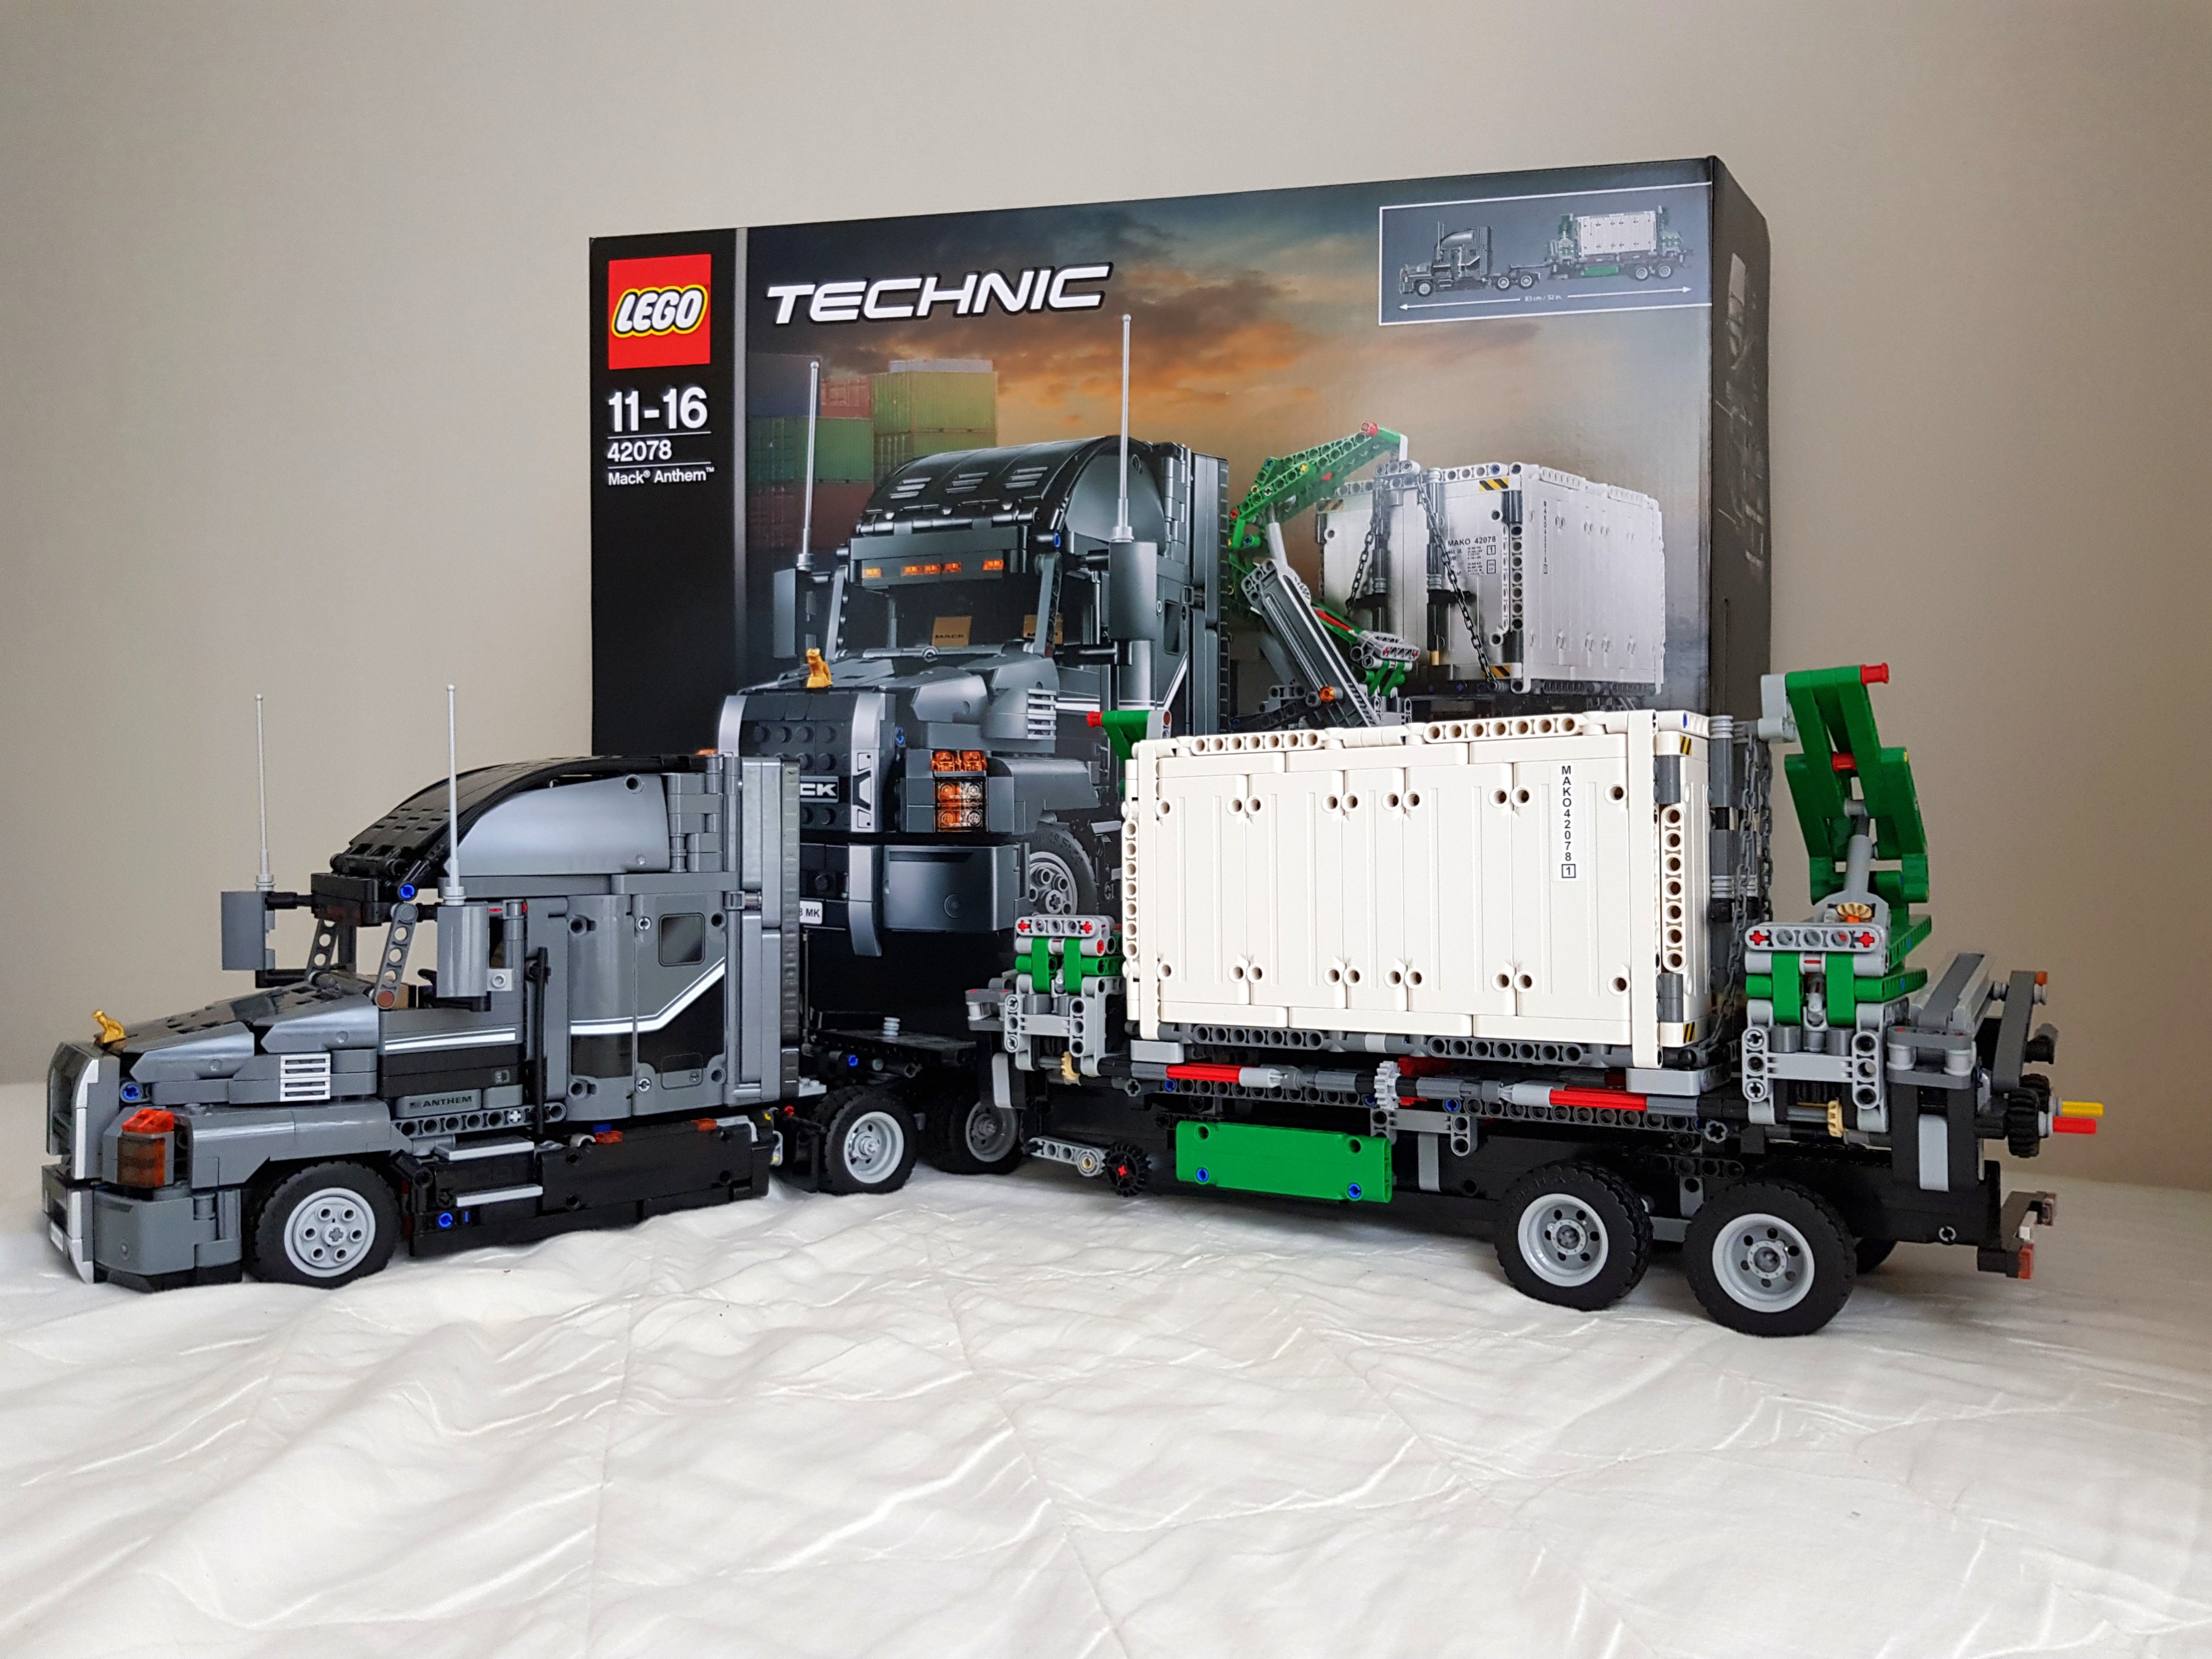 *GREAT CONDITION* LEGO Technic Mack Truck!, Toys & Games, Bricks & Figurines on Carousell